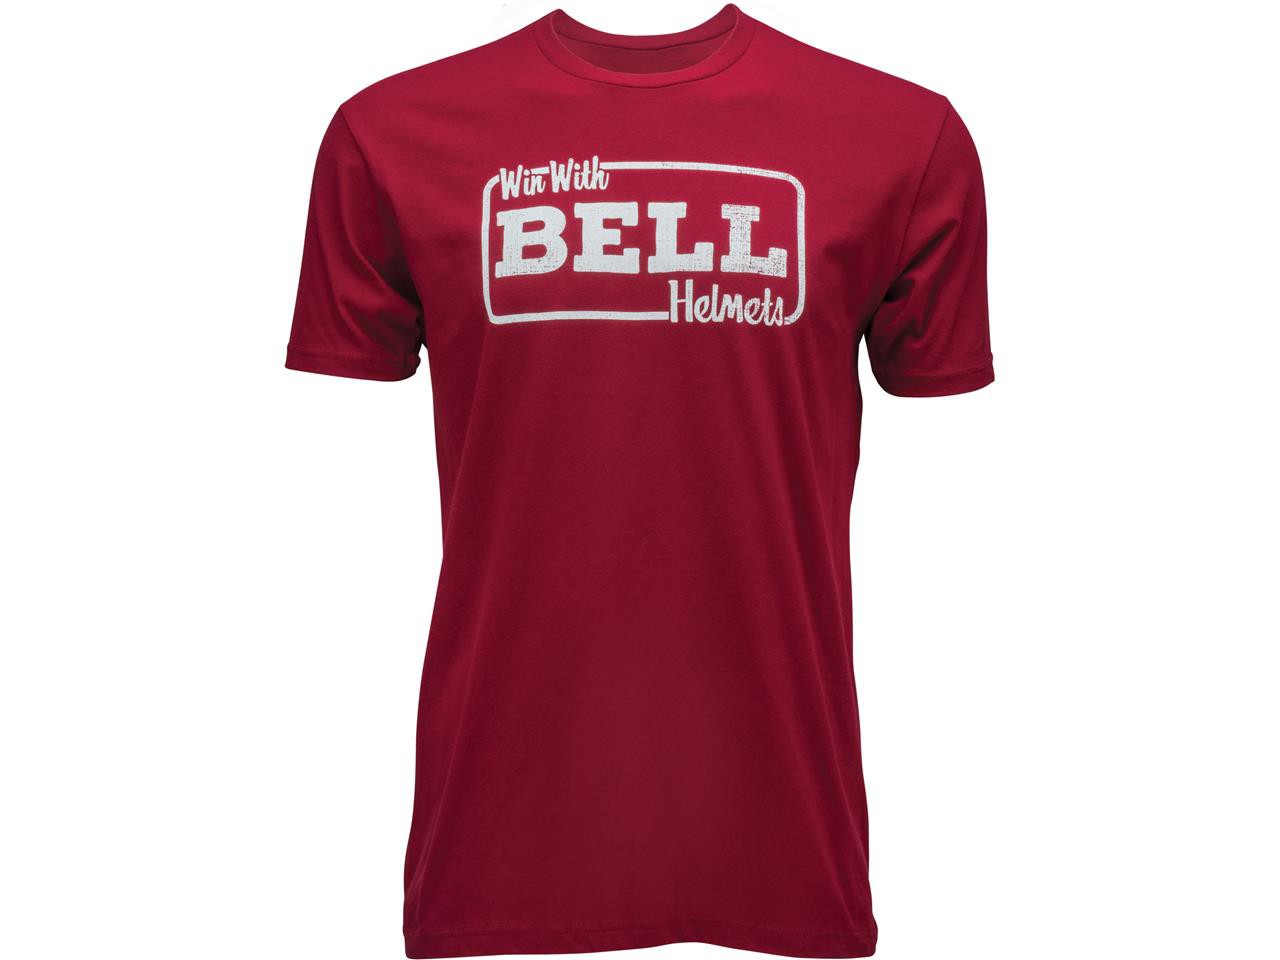 T-Shirt Homme BELL "WIN WITH BELL TEE CARDINAL" Rouge 2021